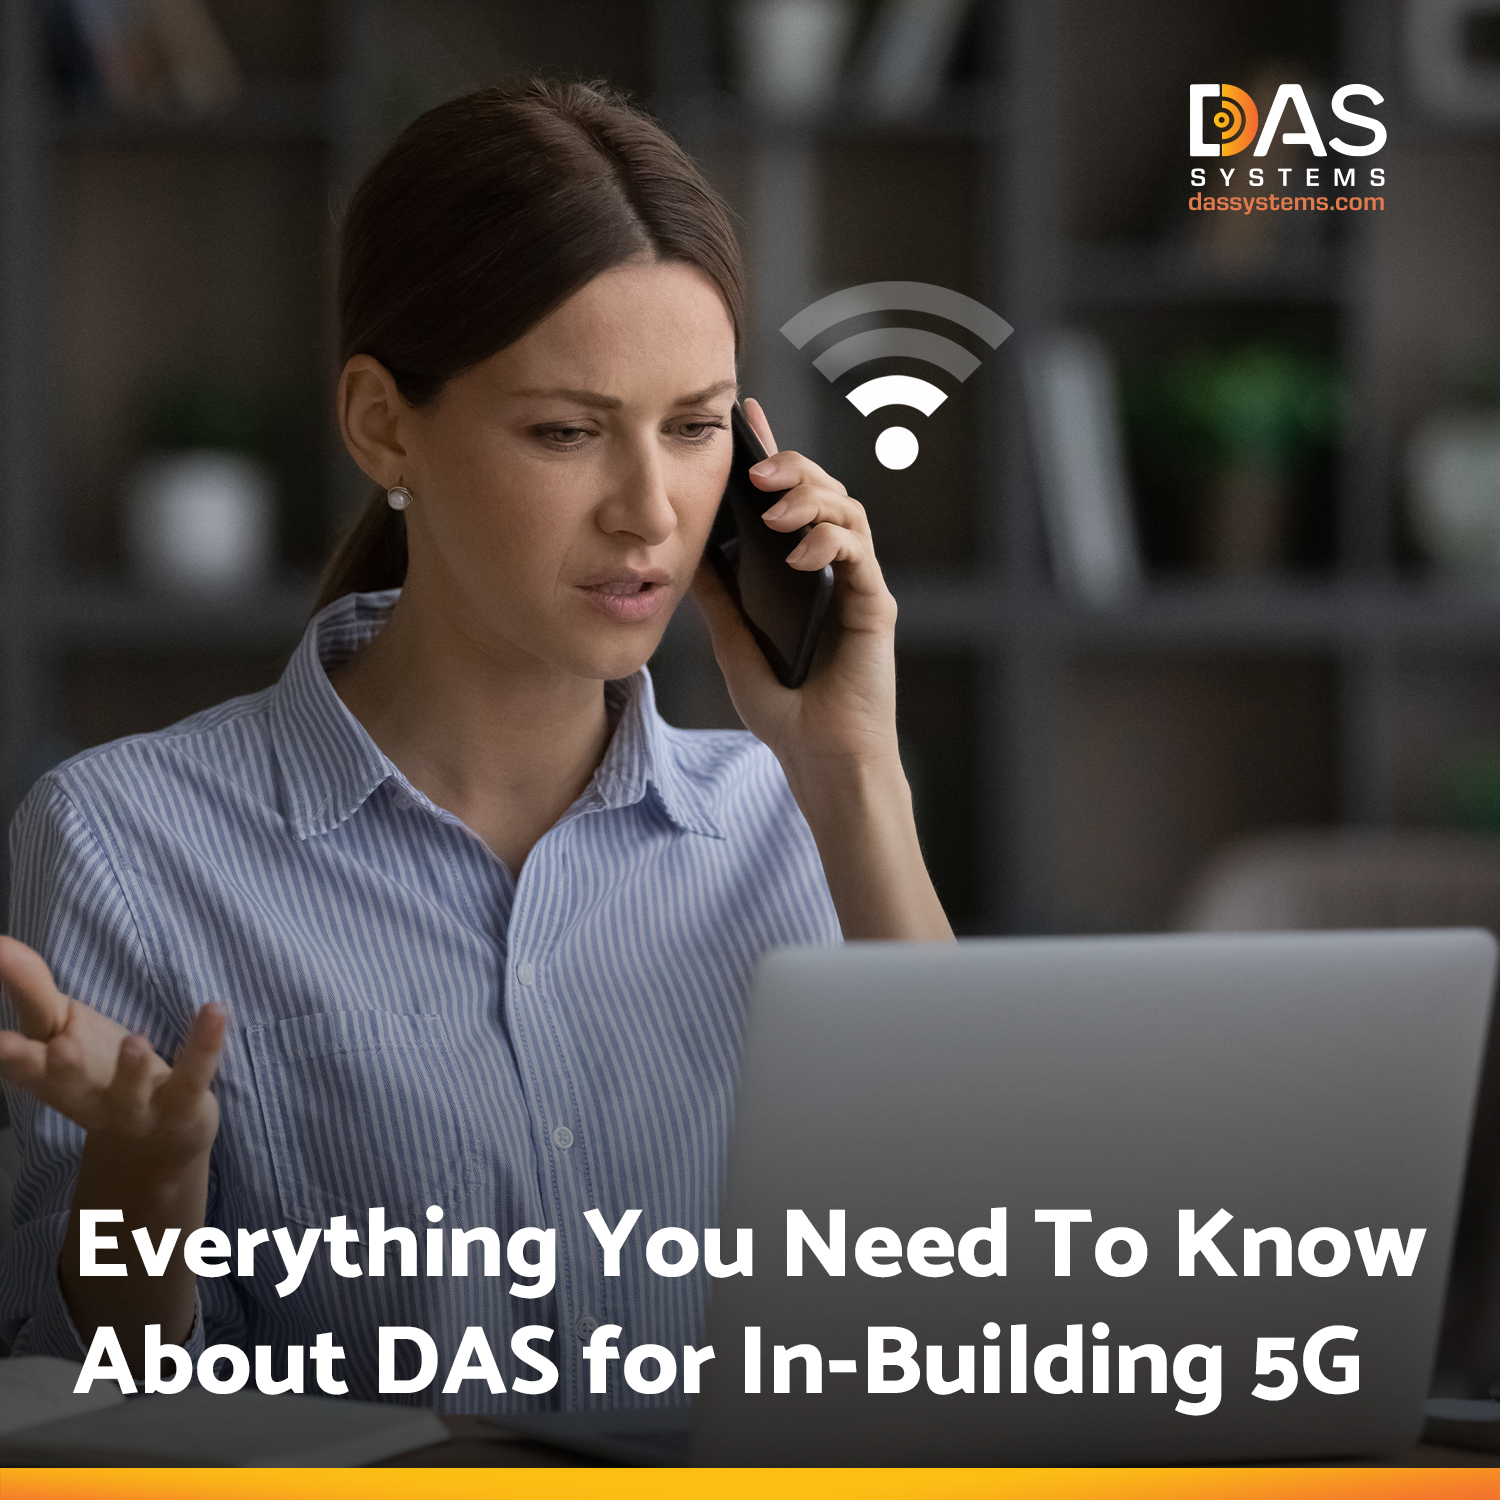 DAS for In-Building 5G